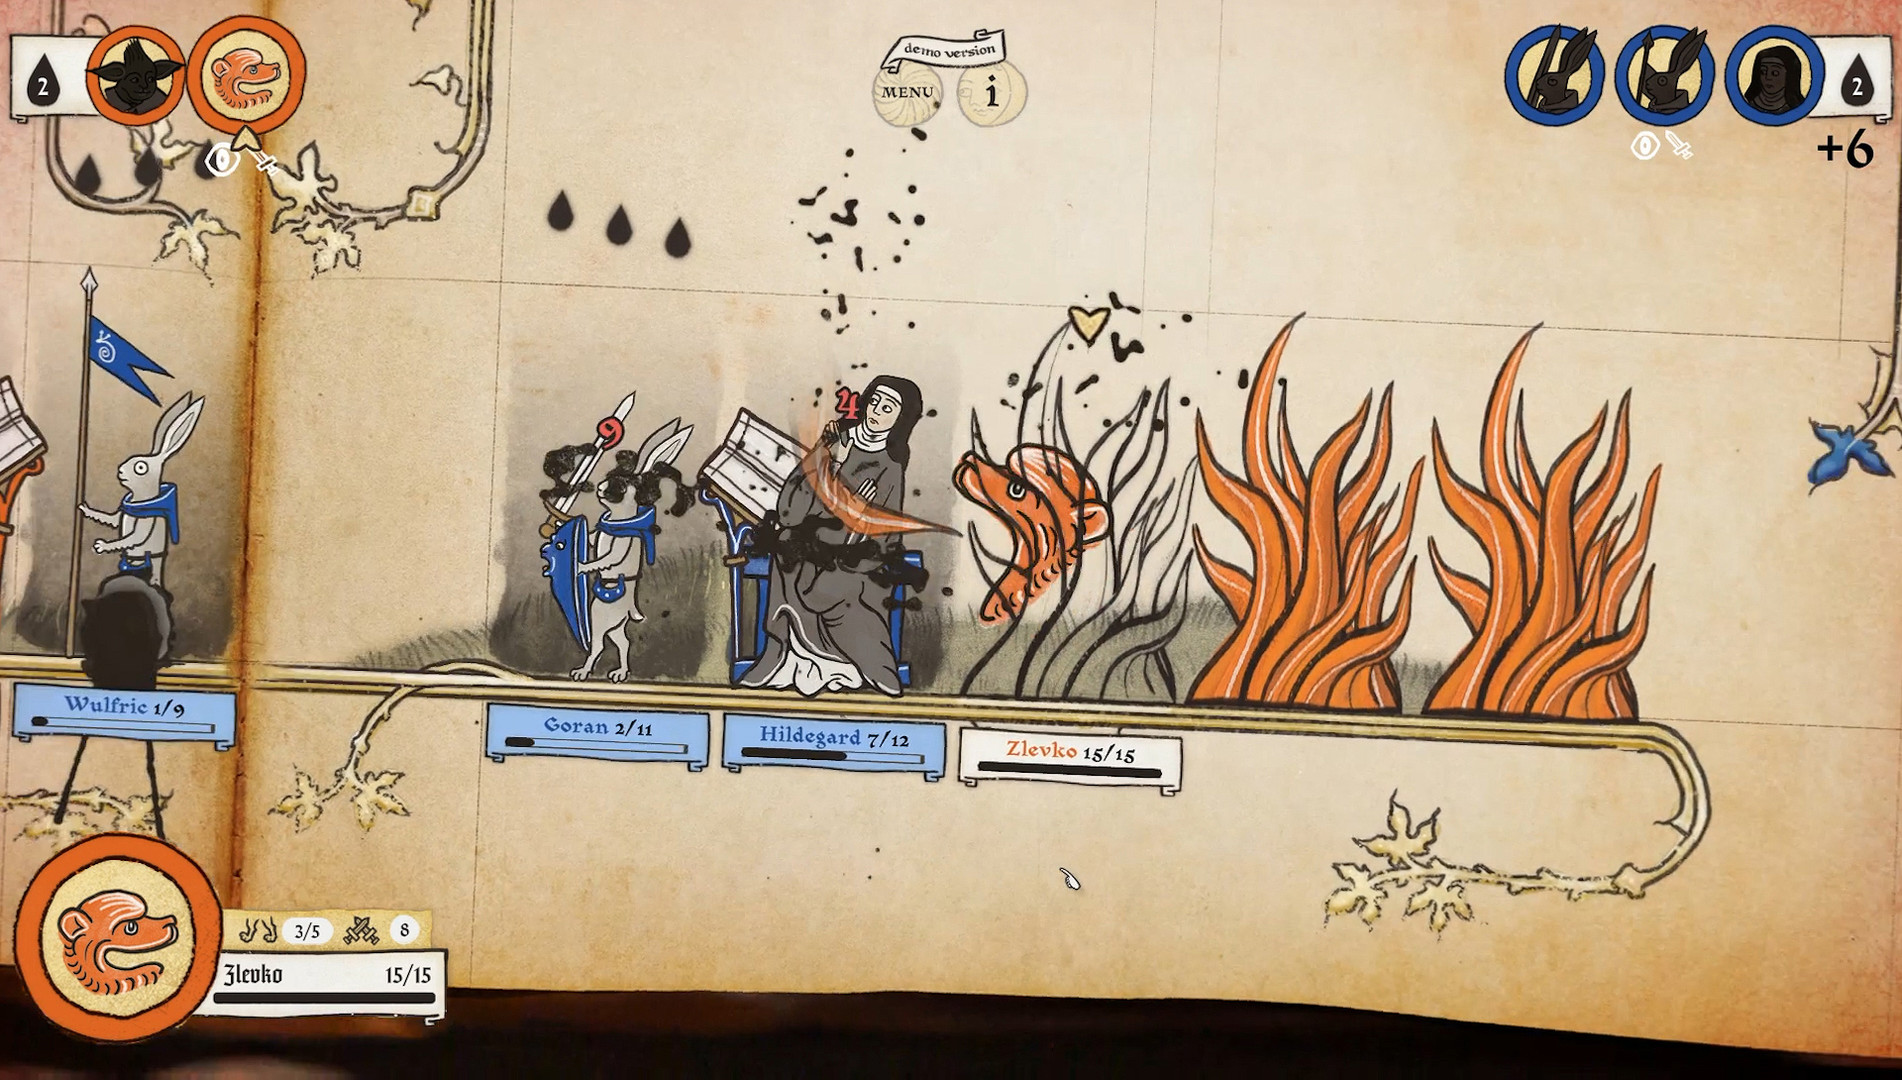 Image of medieval marginalia creatures battling in game Inkulinati. They are illustrated in a style like an illuminated manuscript.